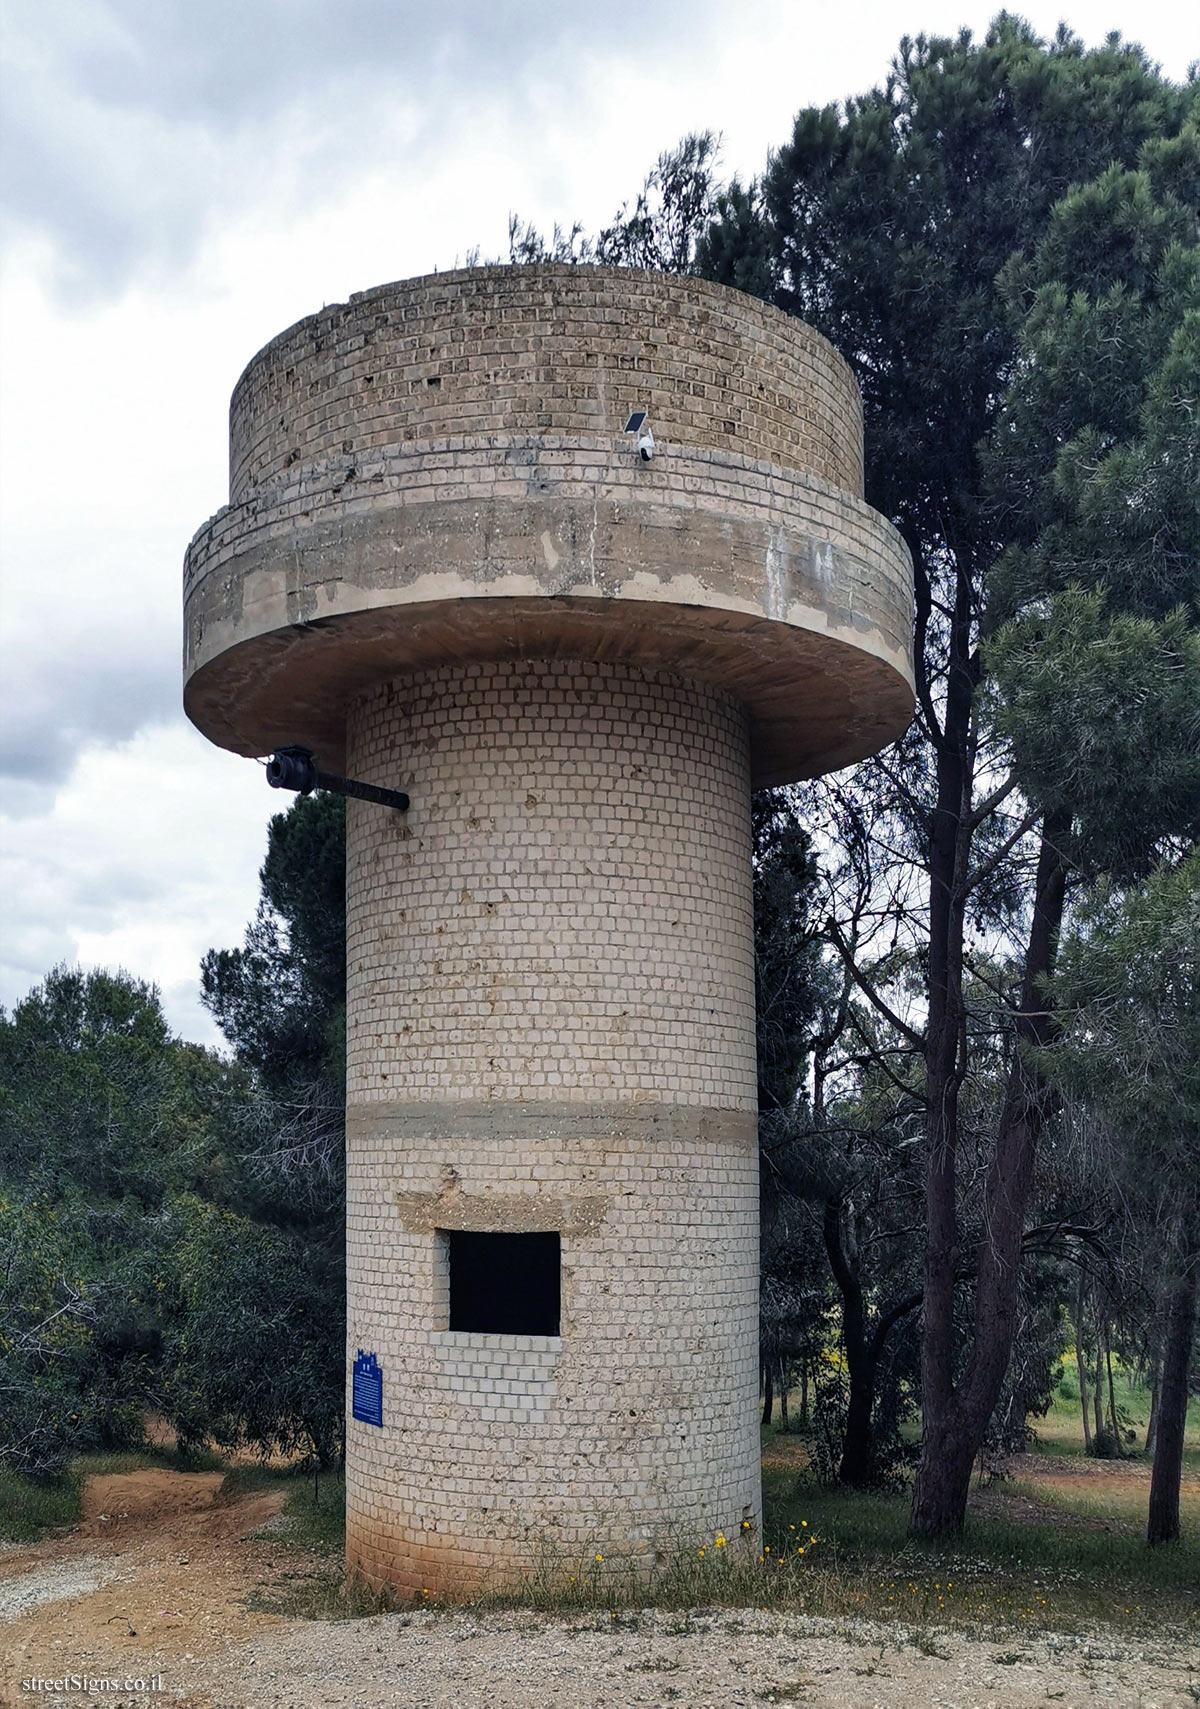 Heritage Sites in Israel - Hill 69 and the water towers - Be’er Tuvya Regional Council, Israel